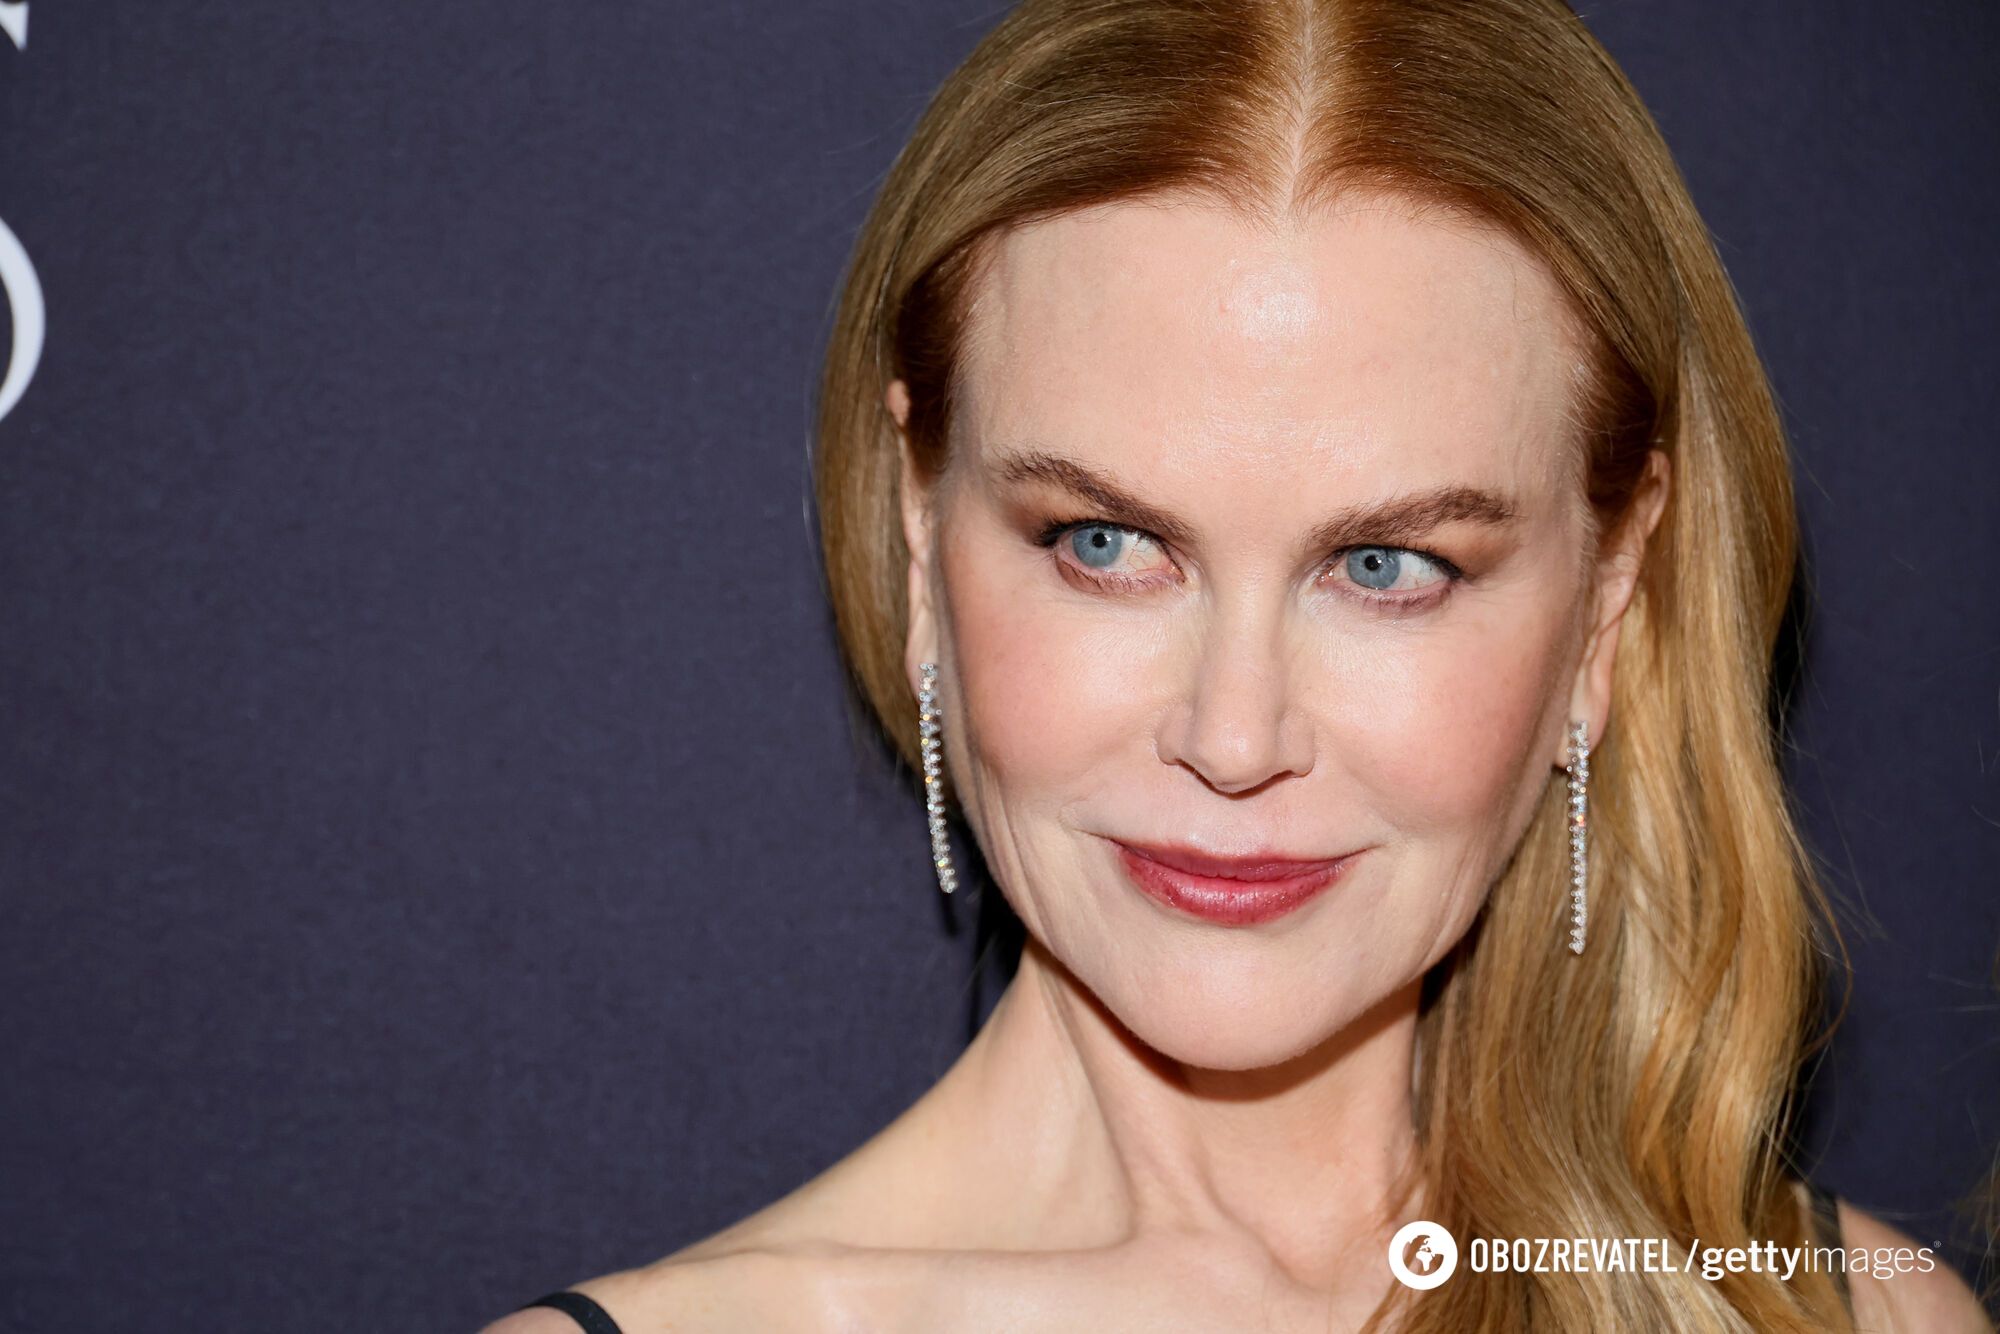 Nicole Kidman in a revealing dress showed taut and glowing skin: what are the beauty secrets of the 56-year-old actress